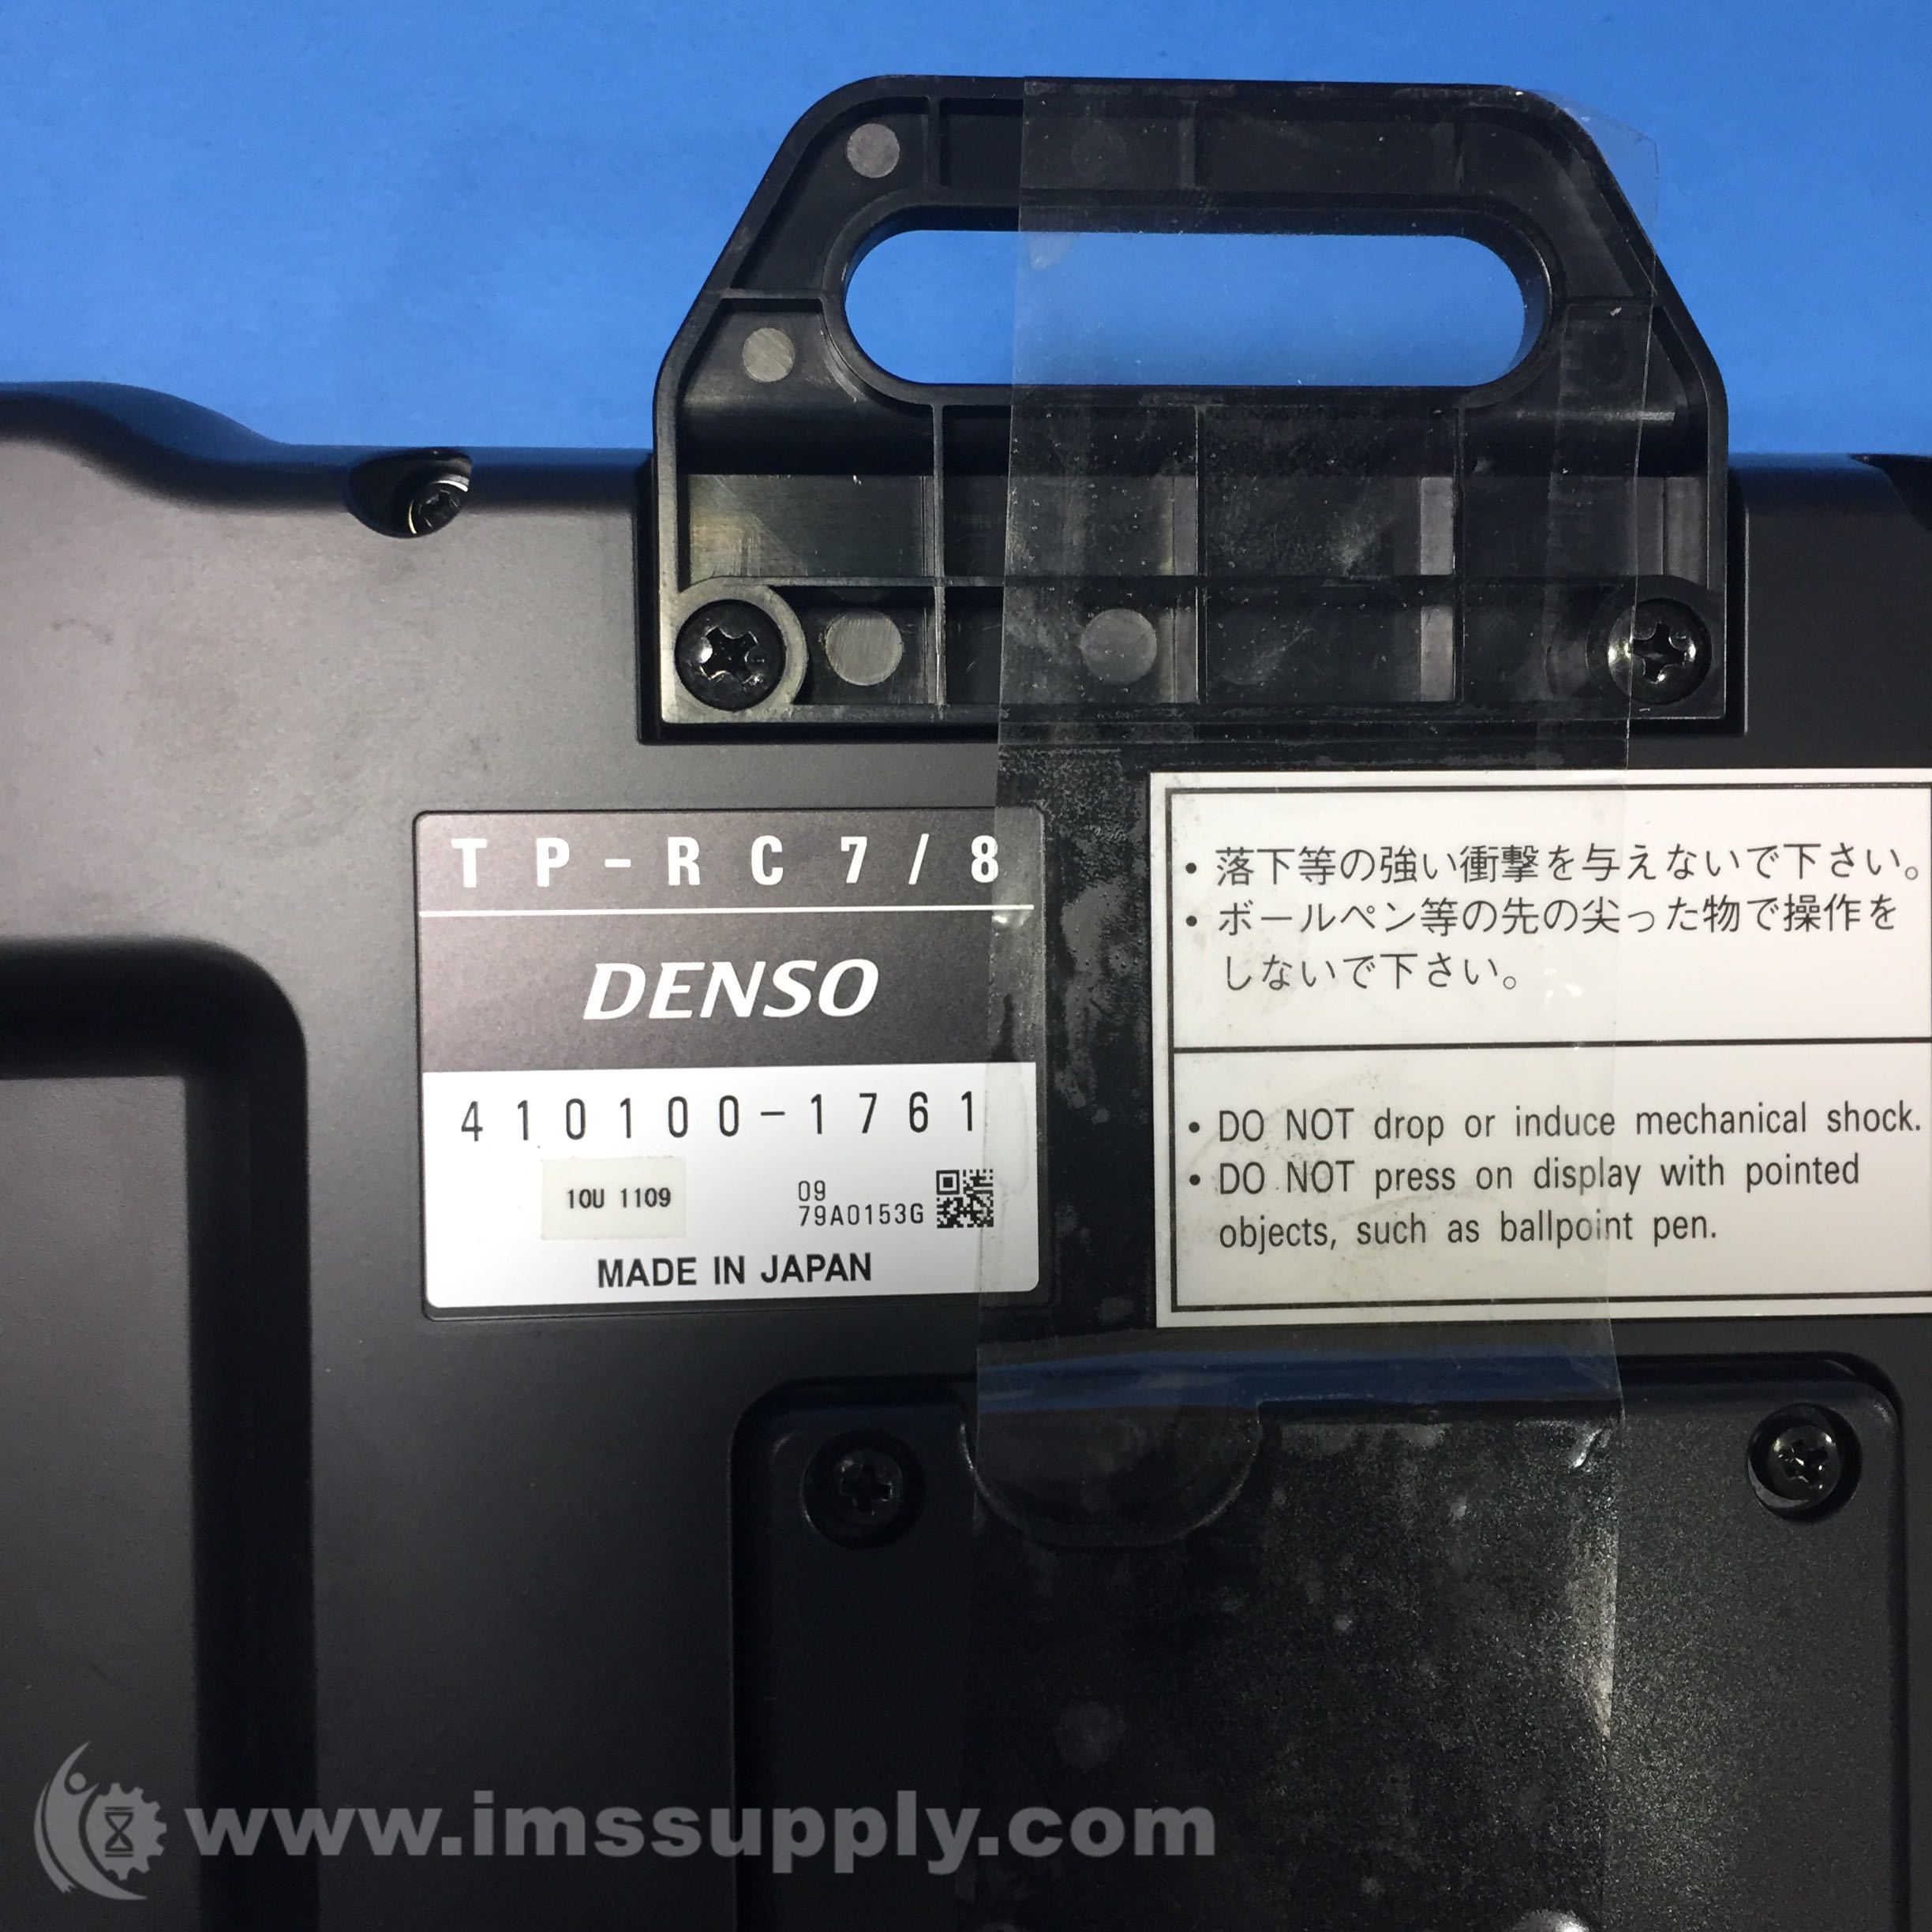 TP-RC7/8 DENSO teach pendant touch panel glass